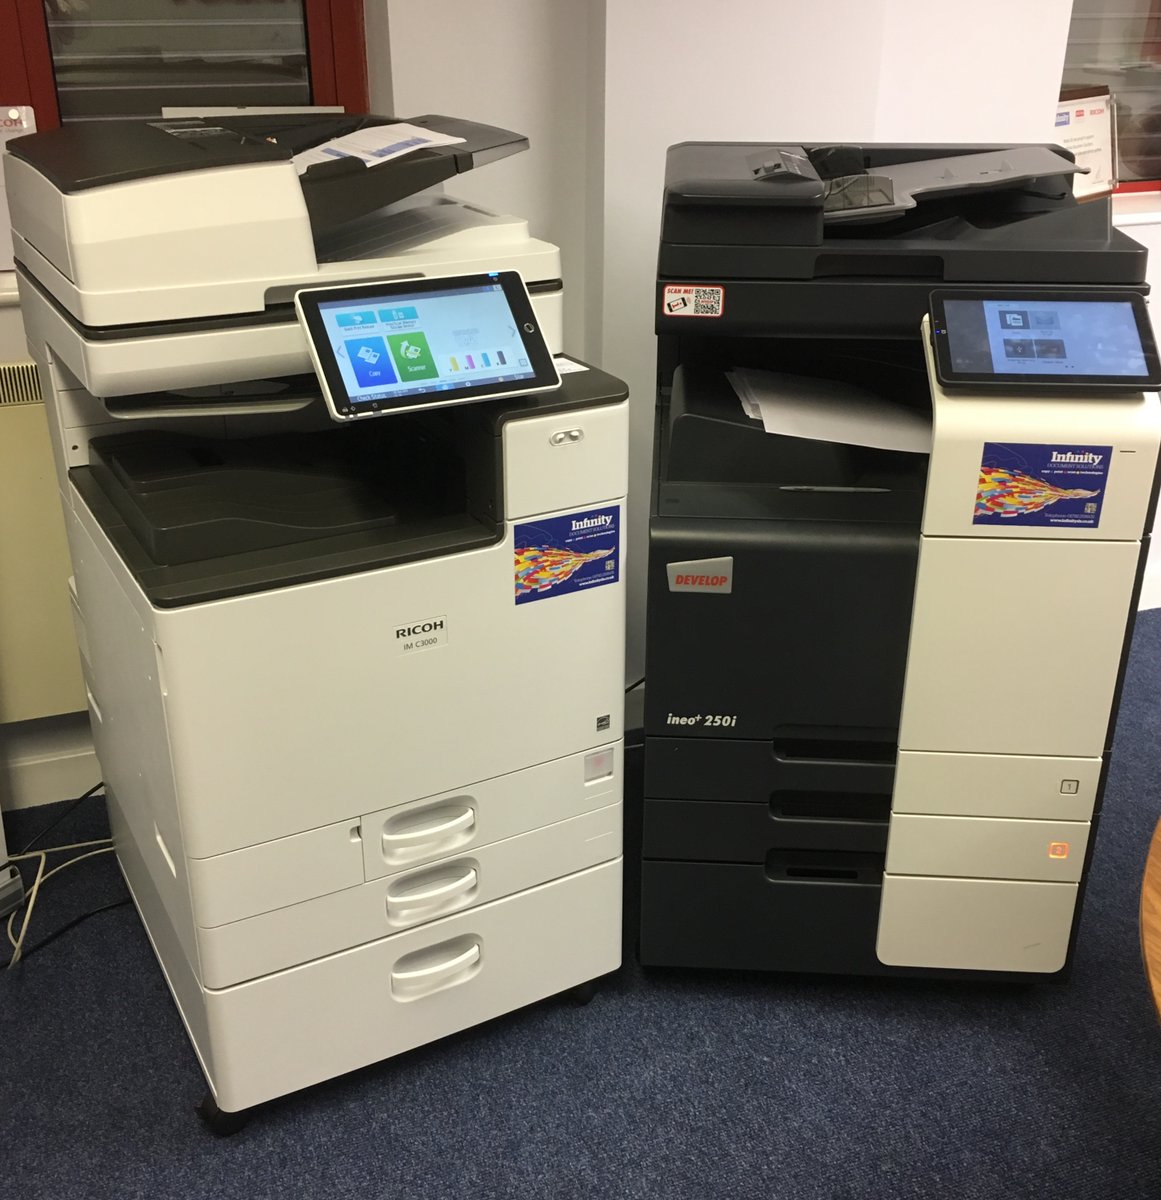 If you are looking for a Multifunction printer offering the very best in productivity, sustainability, workflow and security contact a member of our team ☎️01792 293605 infinityds.co.uk/multifunctiona…